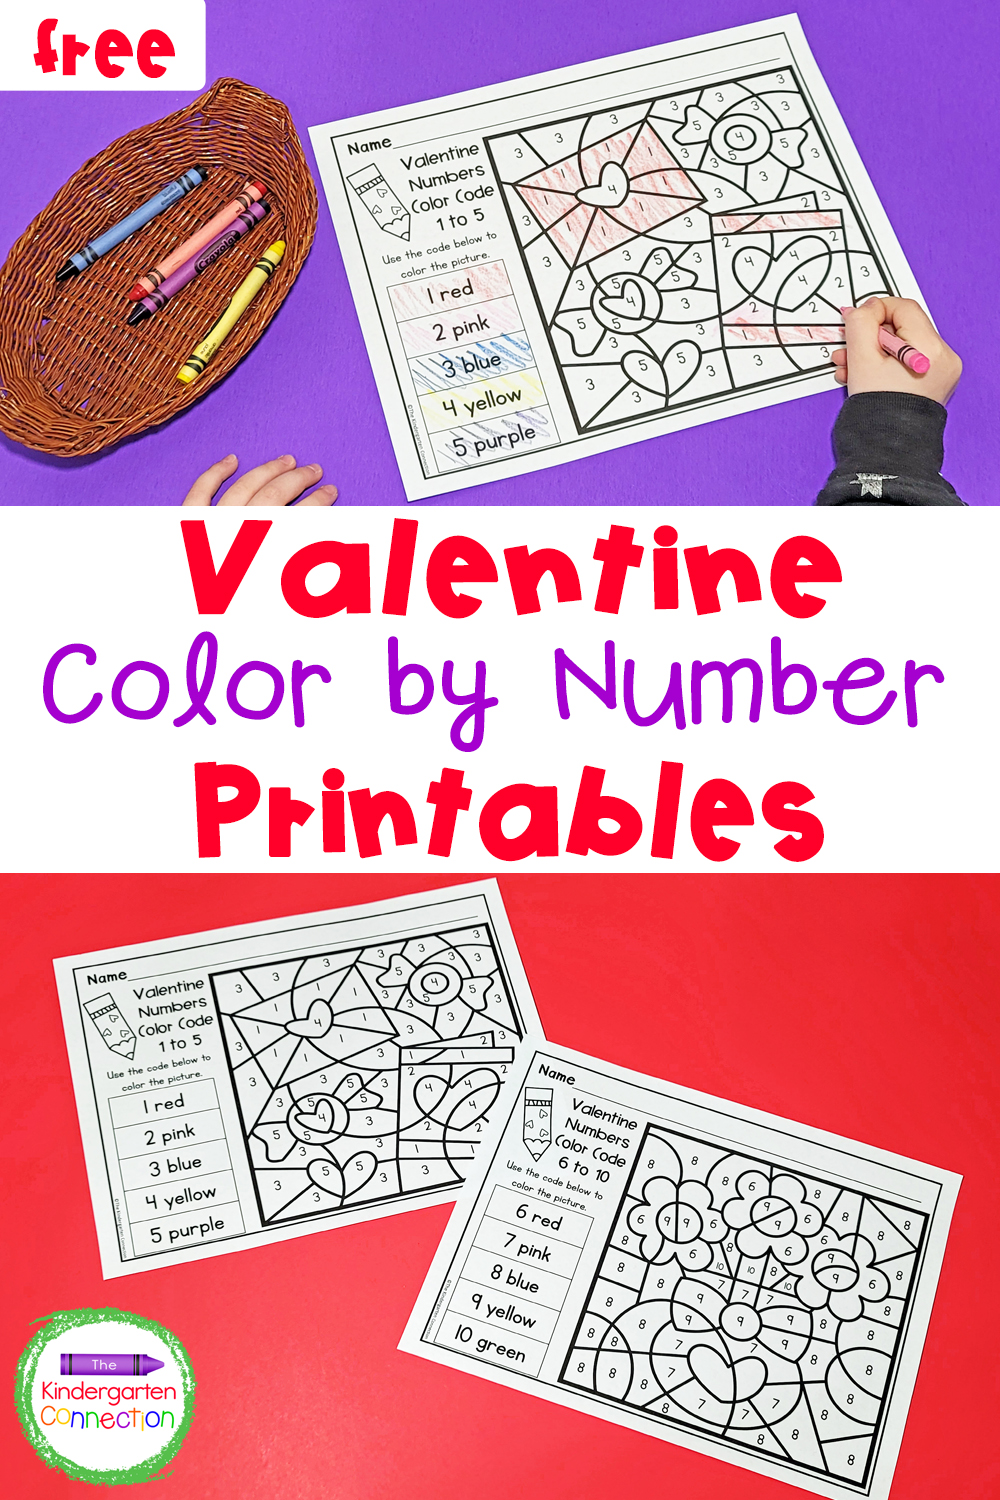 Get ready to celebrate the holiday with these free Valentine Color By Number Printables that your students will LOVE!